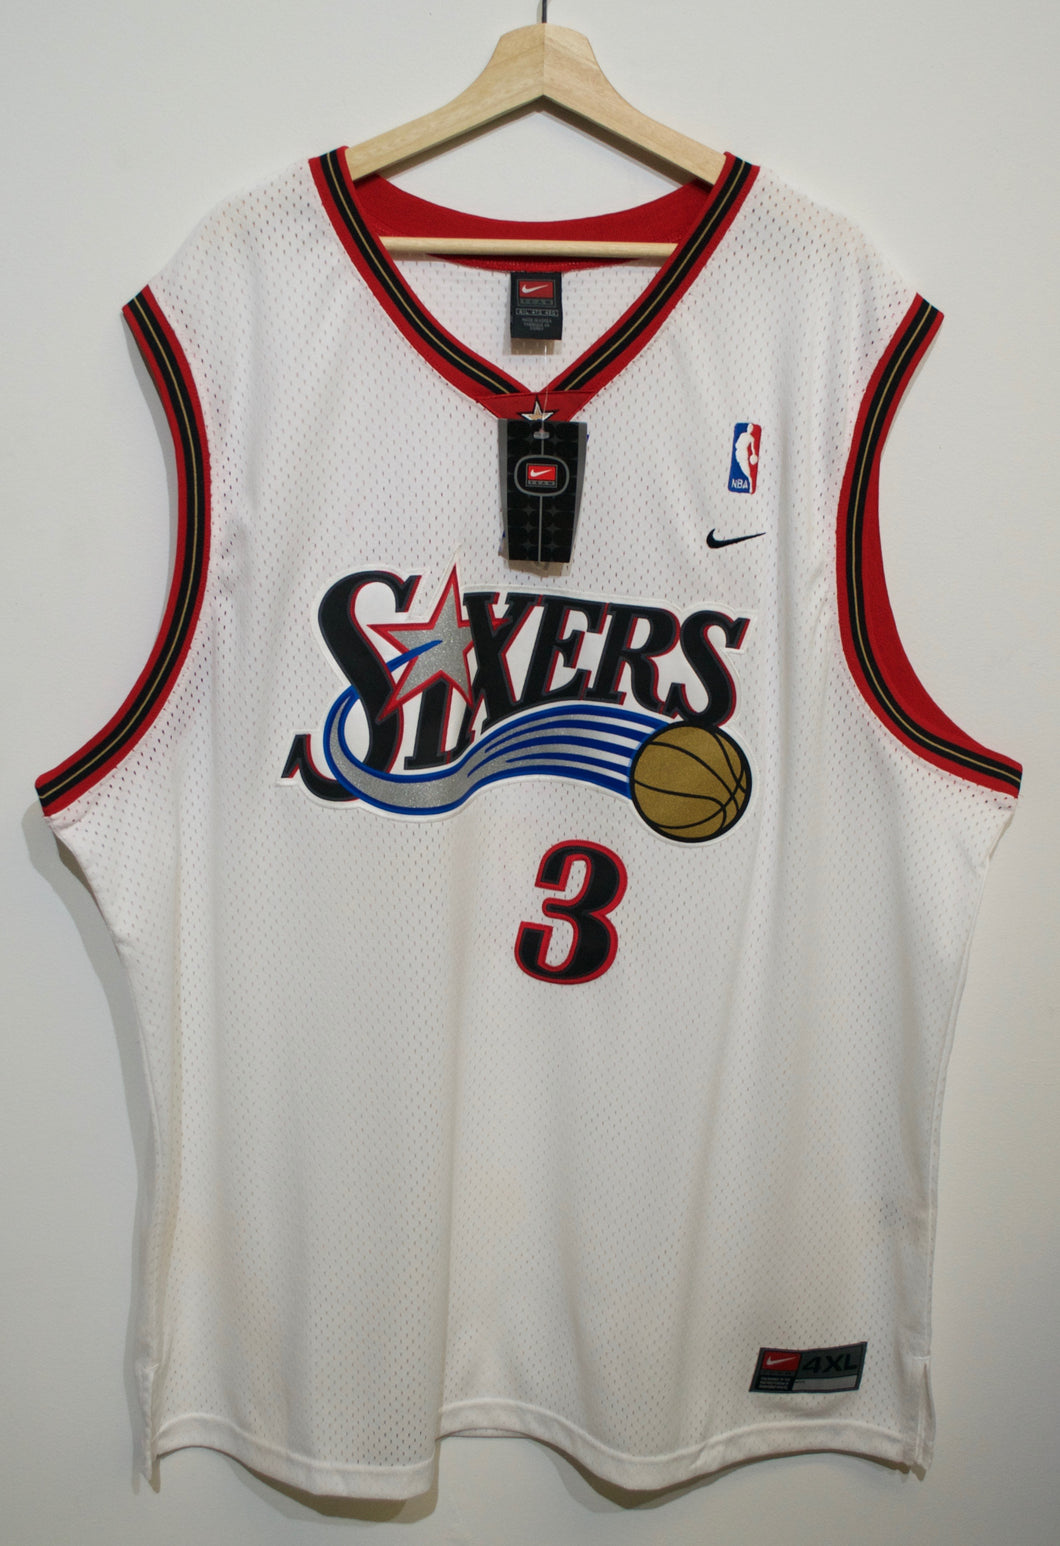 Allen Iverson Sixers Jersey sz 4XL New w. Tags